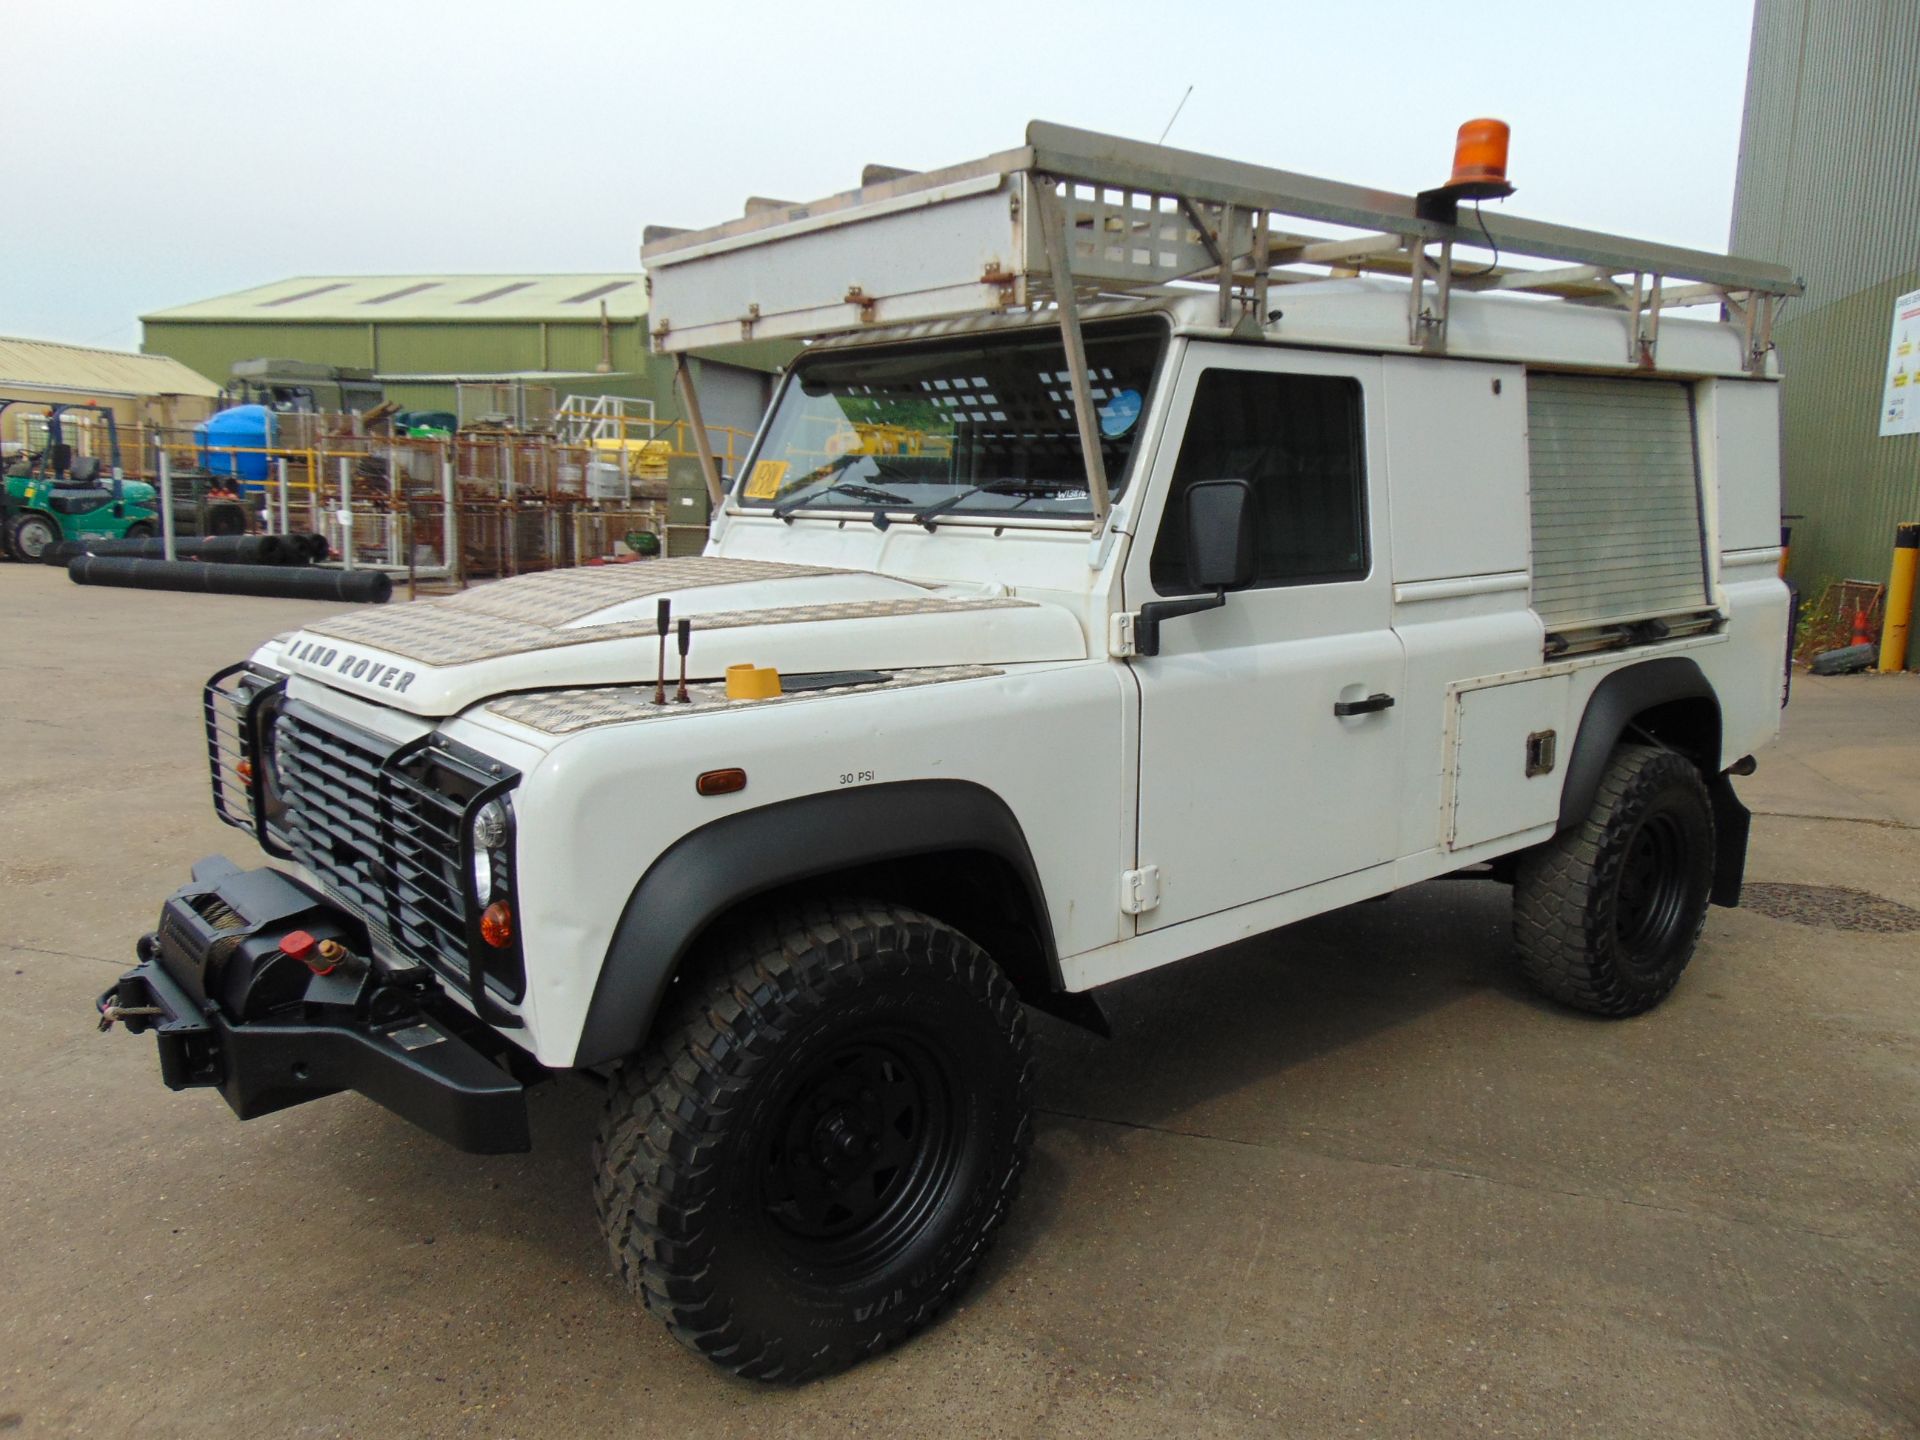 2013 Land Rover Defender 110 Puma hardtop 4x4 Utility vehicle (mobile workshop) with hydraulic winch - Image 5 of 44